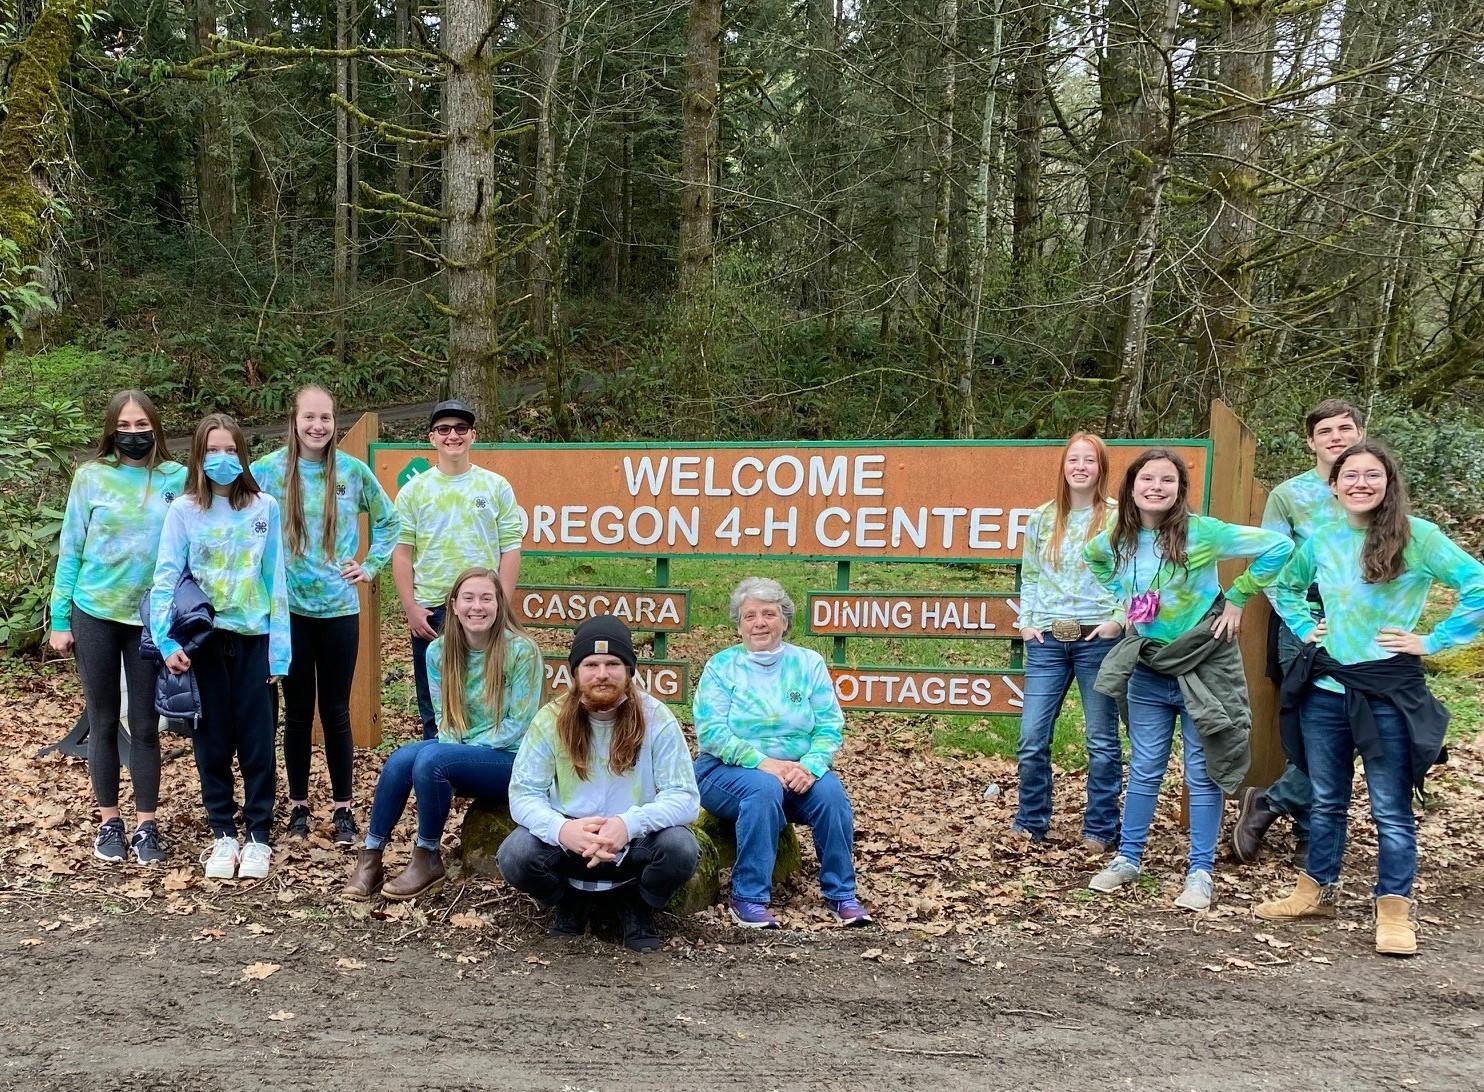 A group of 4-H youth participants and leaders stand outdoors in front of a sign reading 